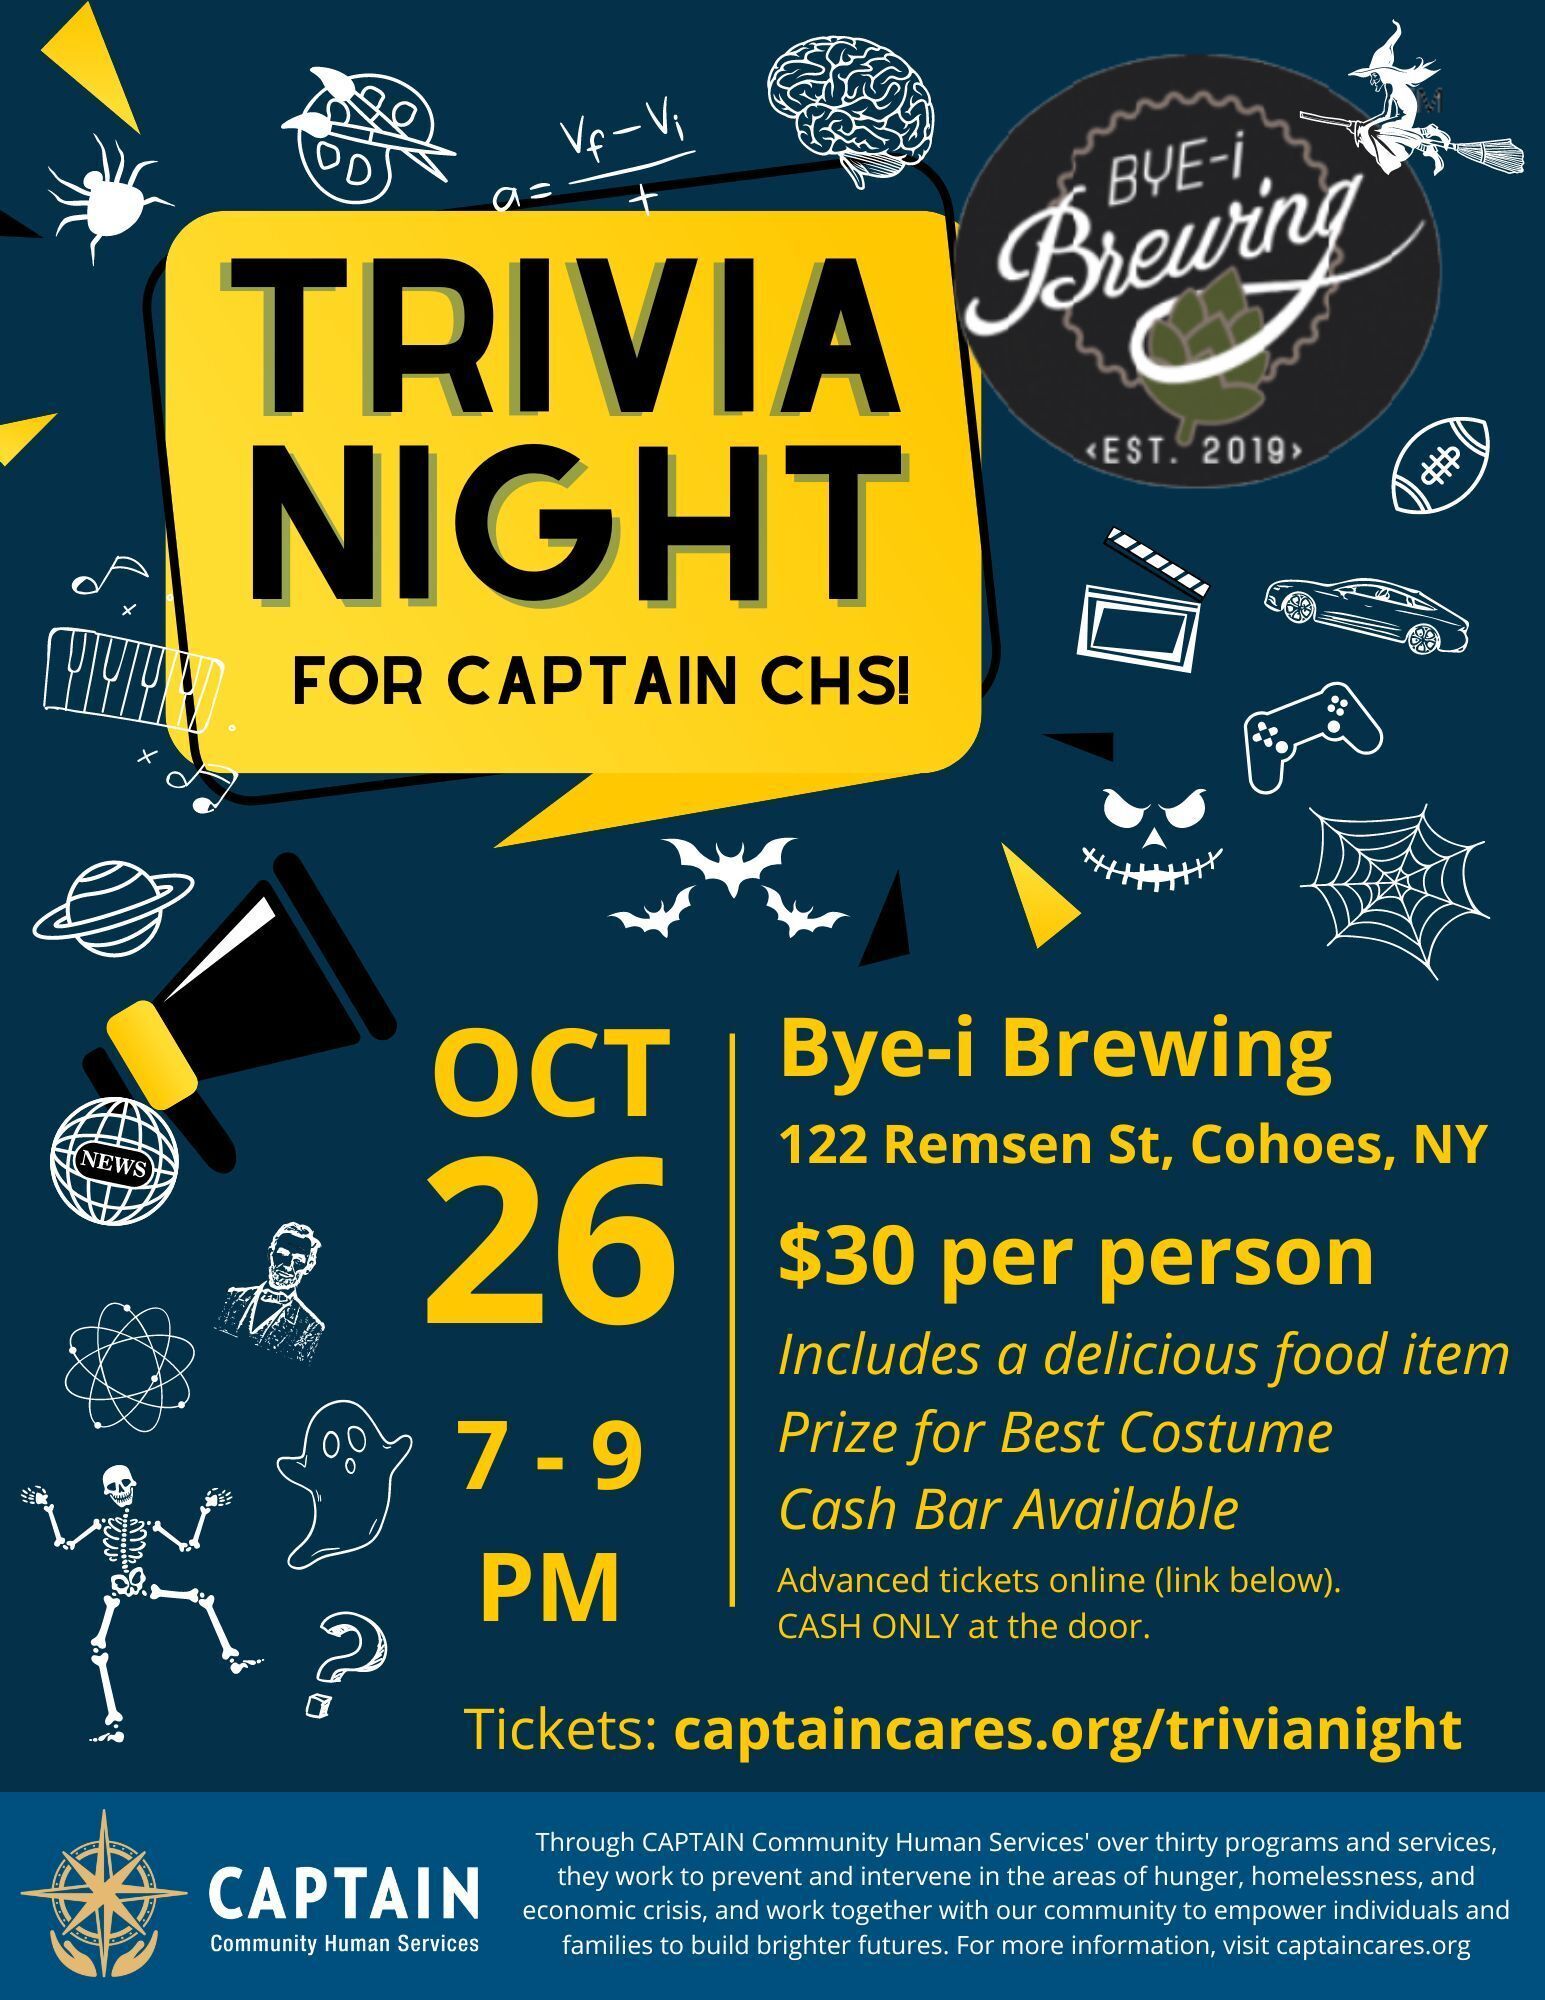 Trivia Night for CAPTAIN CHS!